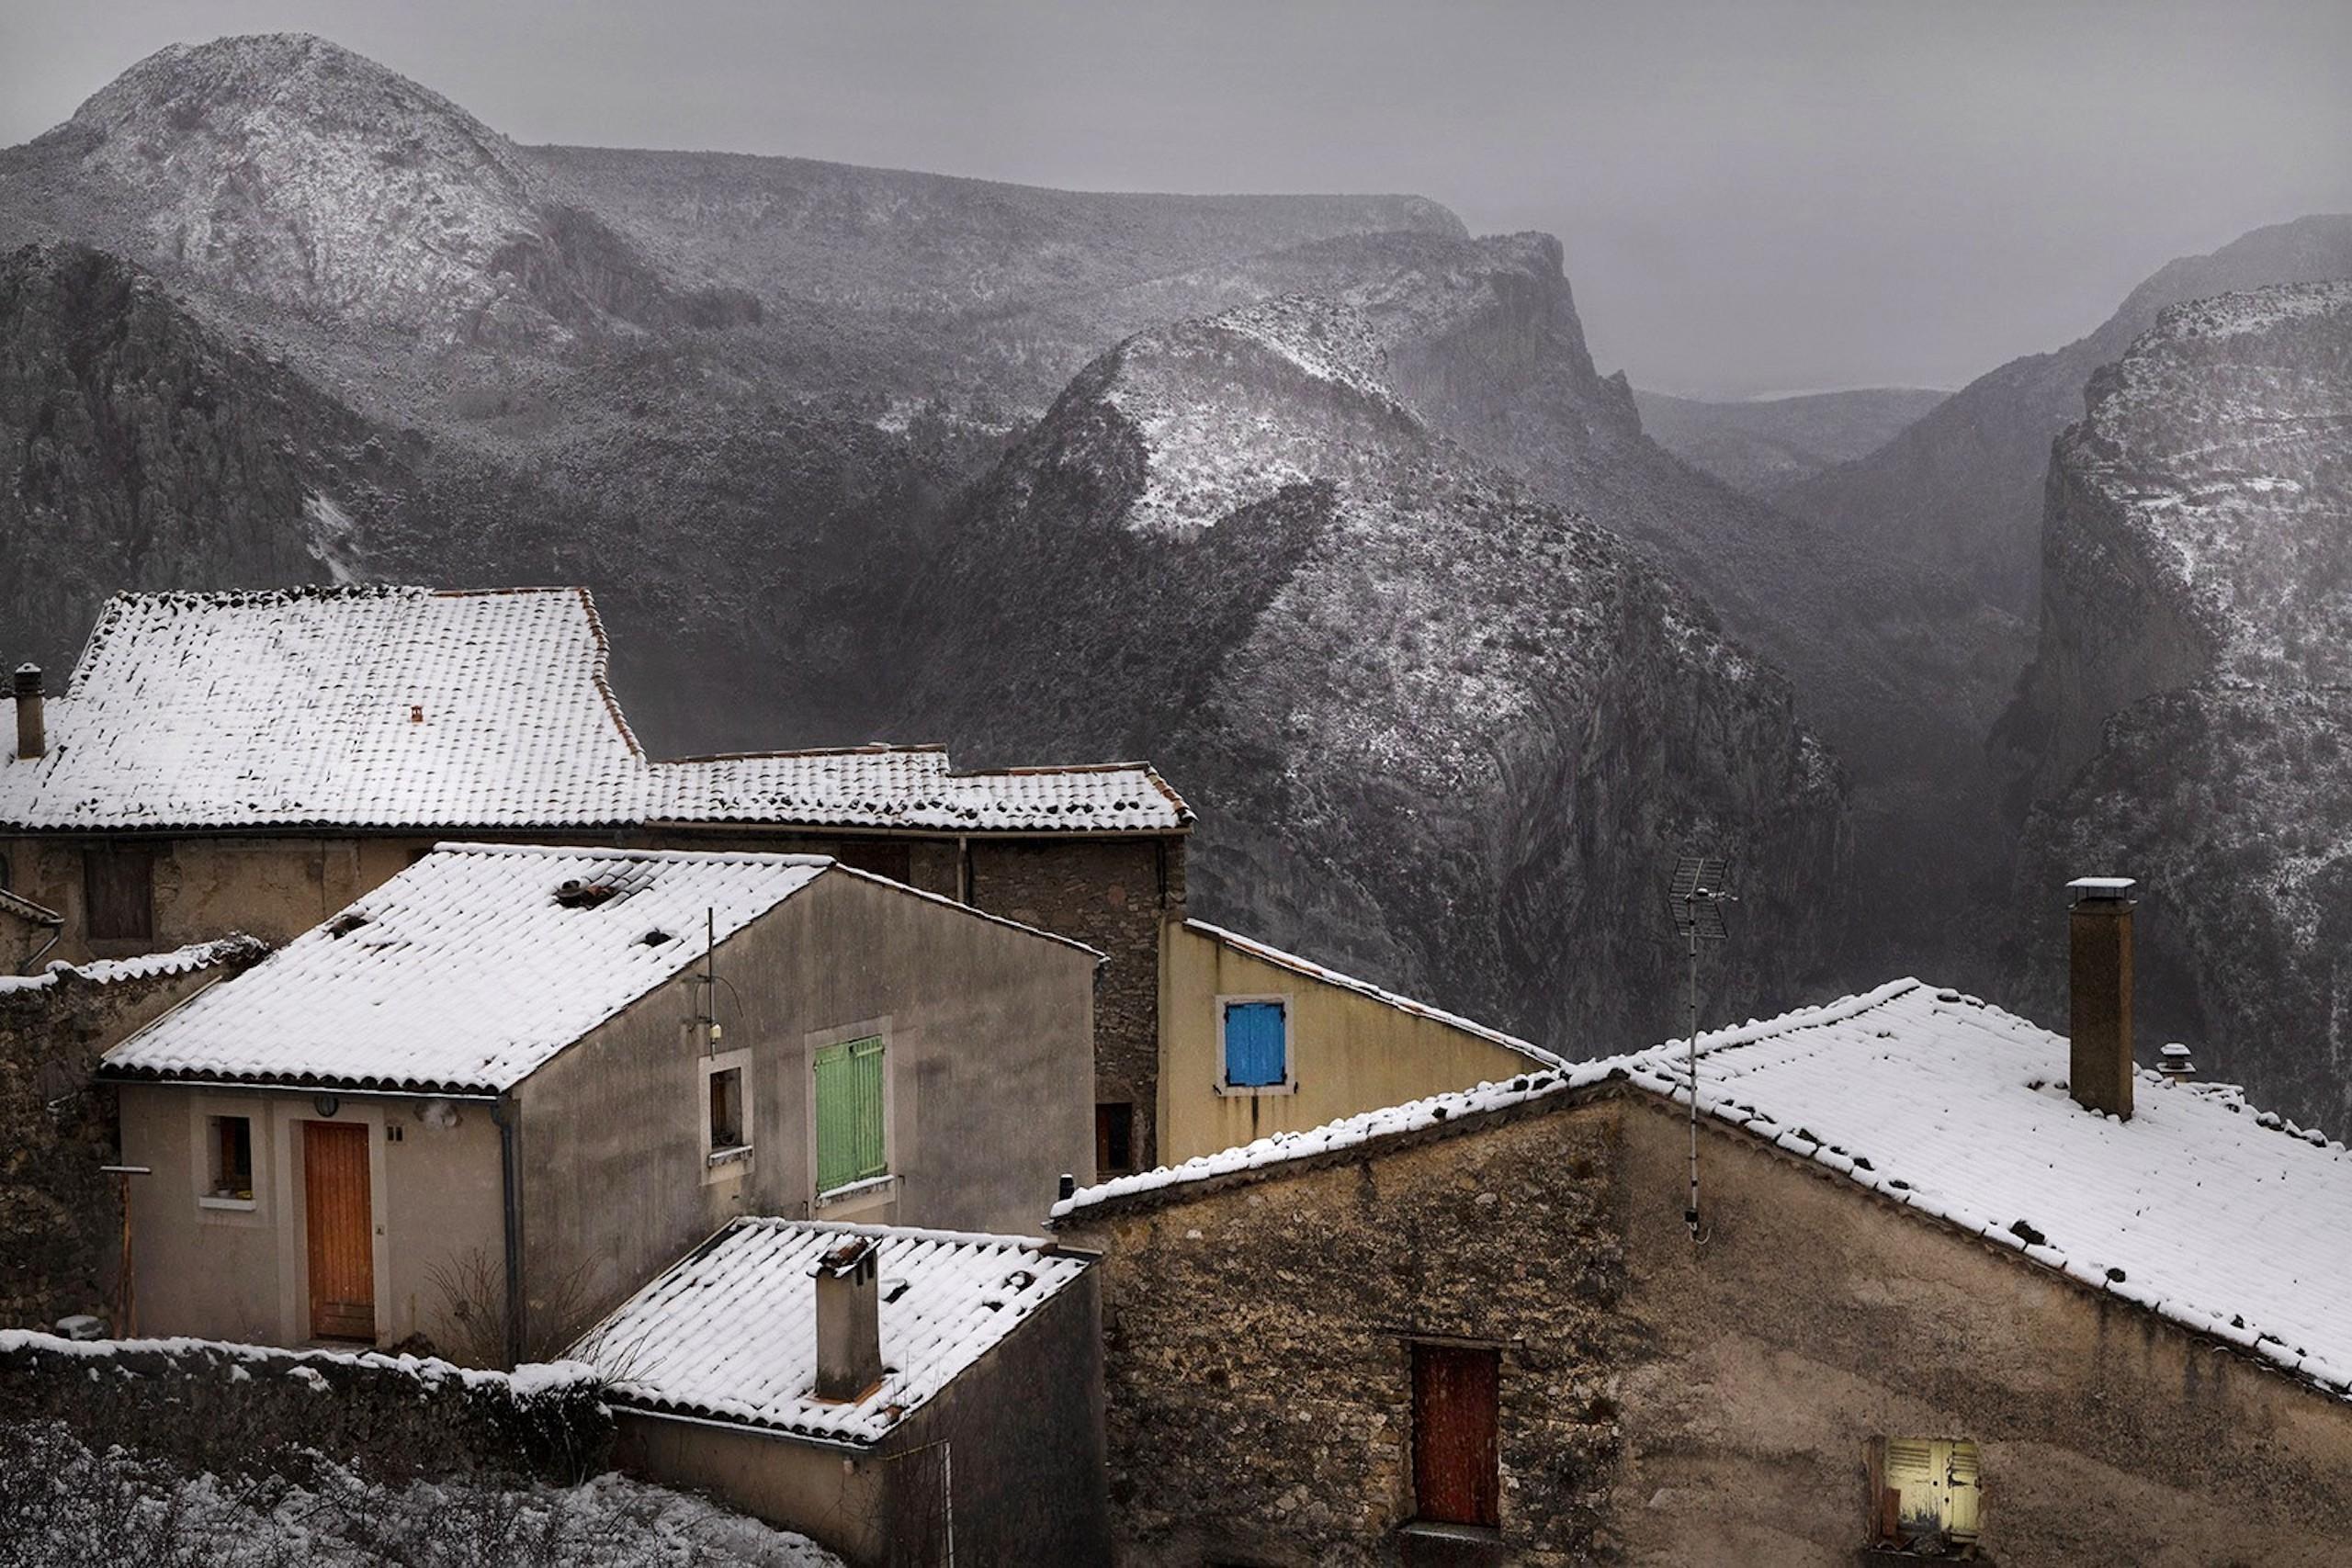 Verdon Roofs is a limited-edition photograph by contemporary artist Christophe Jacrot. It is a part of the “Blizzard 4” series.
 
This photograph is sold unframed as a print only. It is available in 2 dimensions:
*60 cm × 90 cm (23.6" × 35.4"),